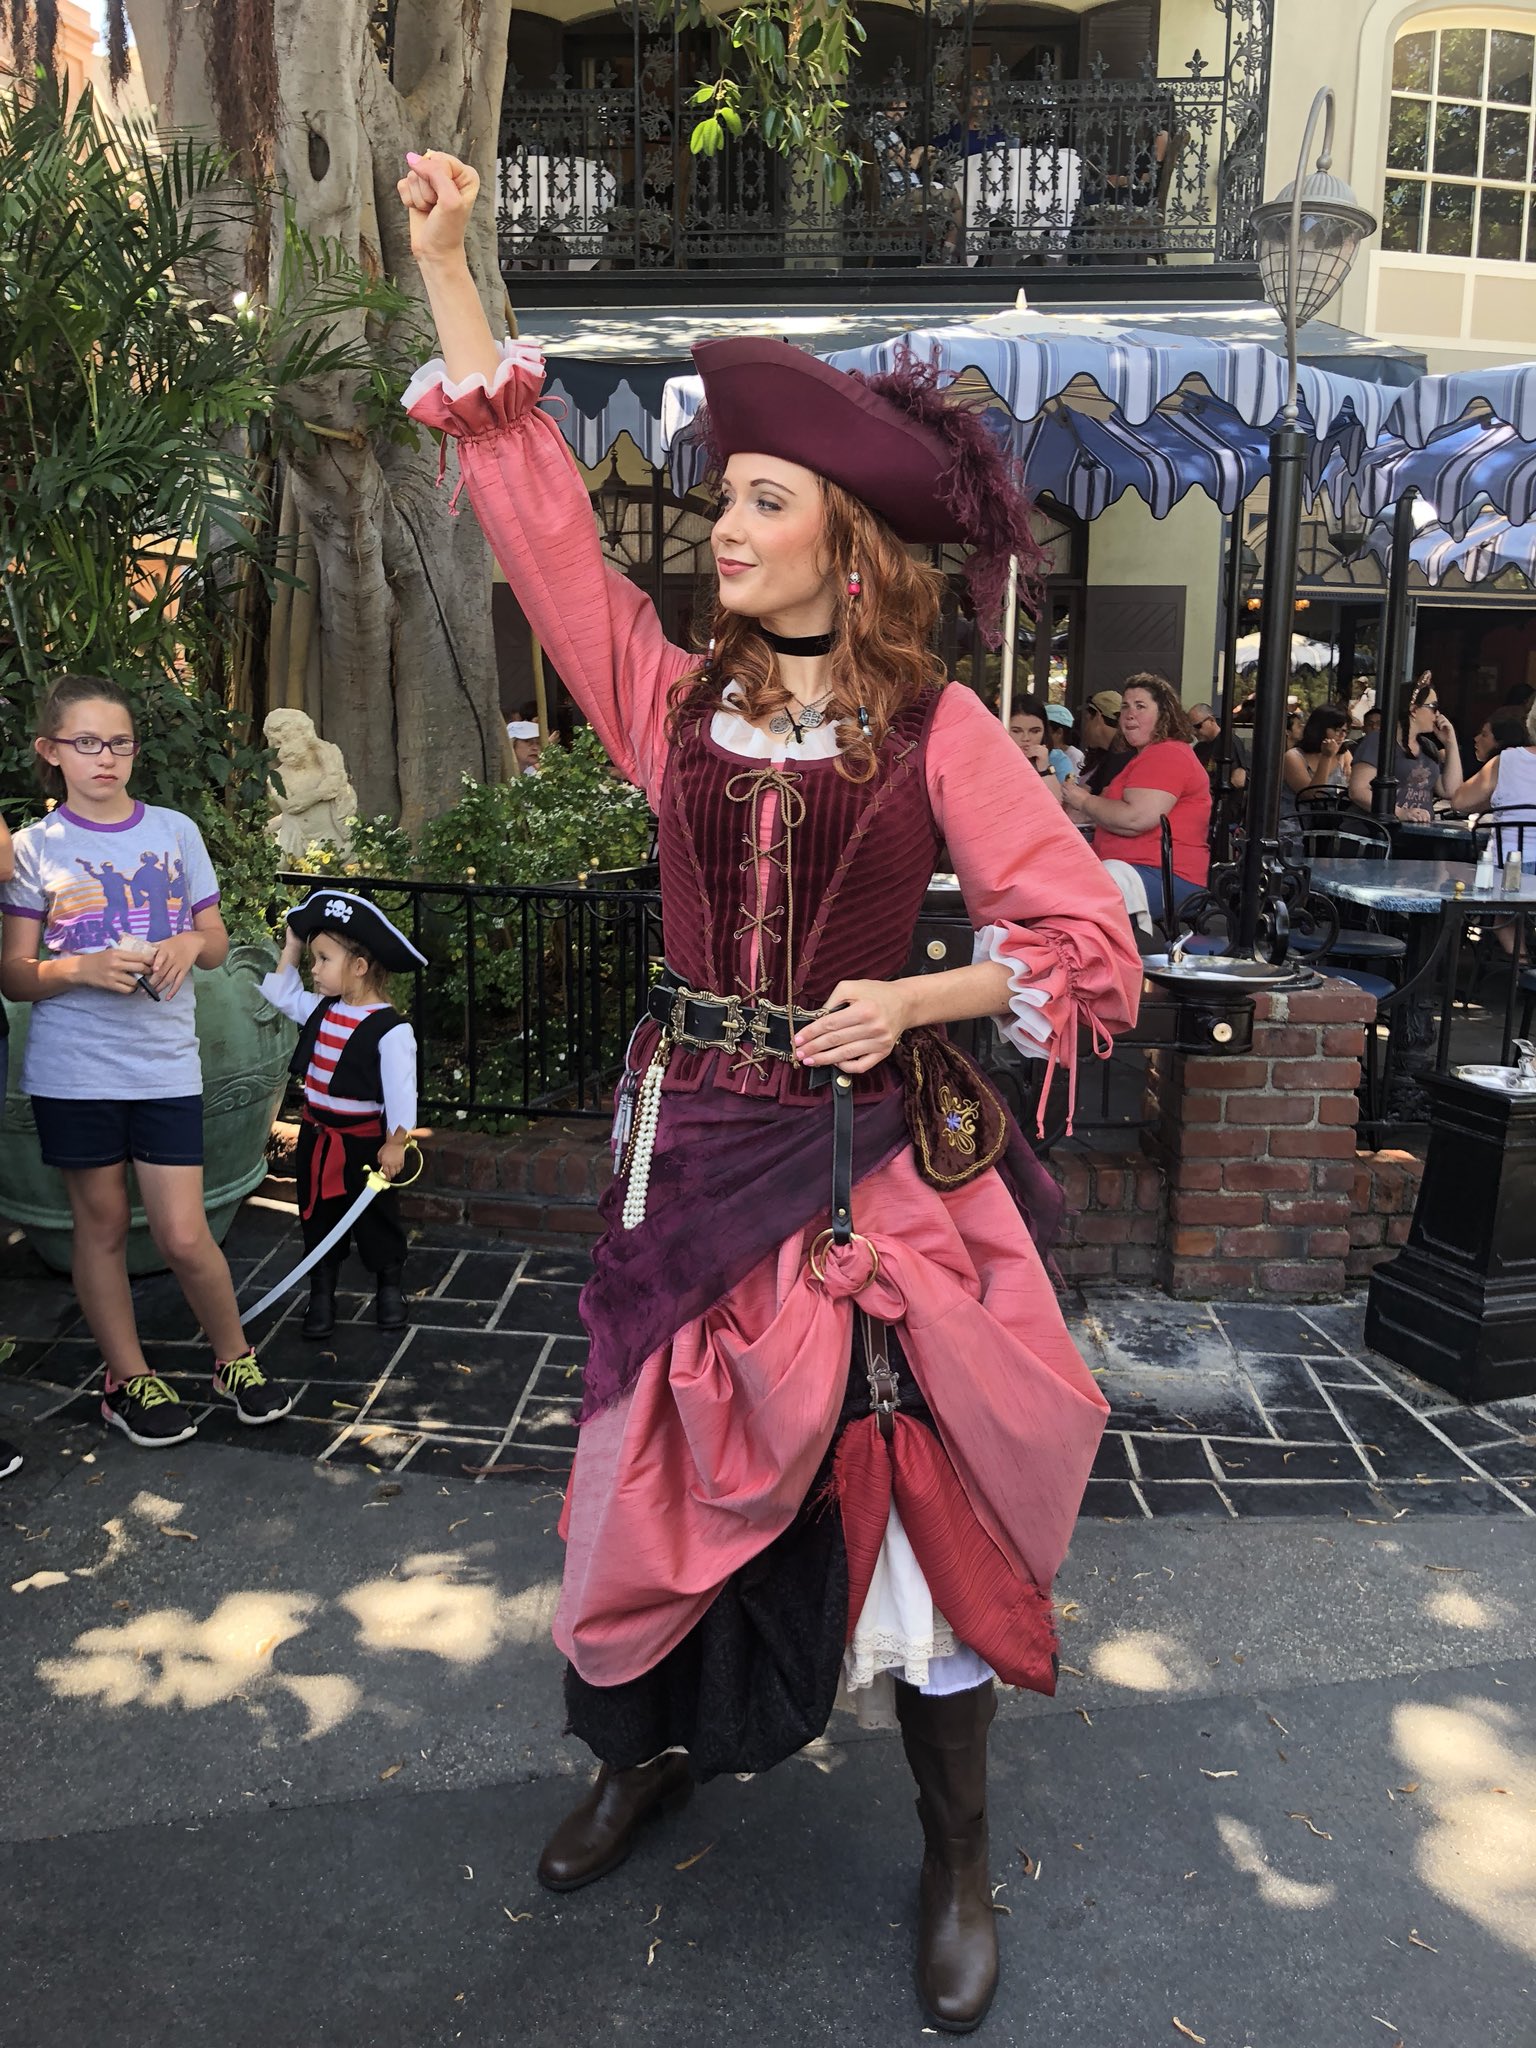 Redd the pirate on